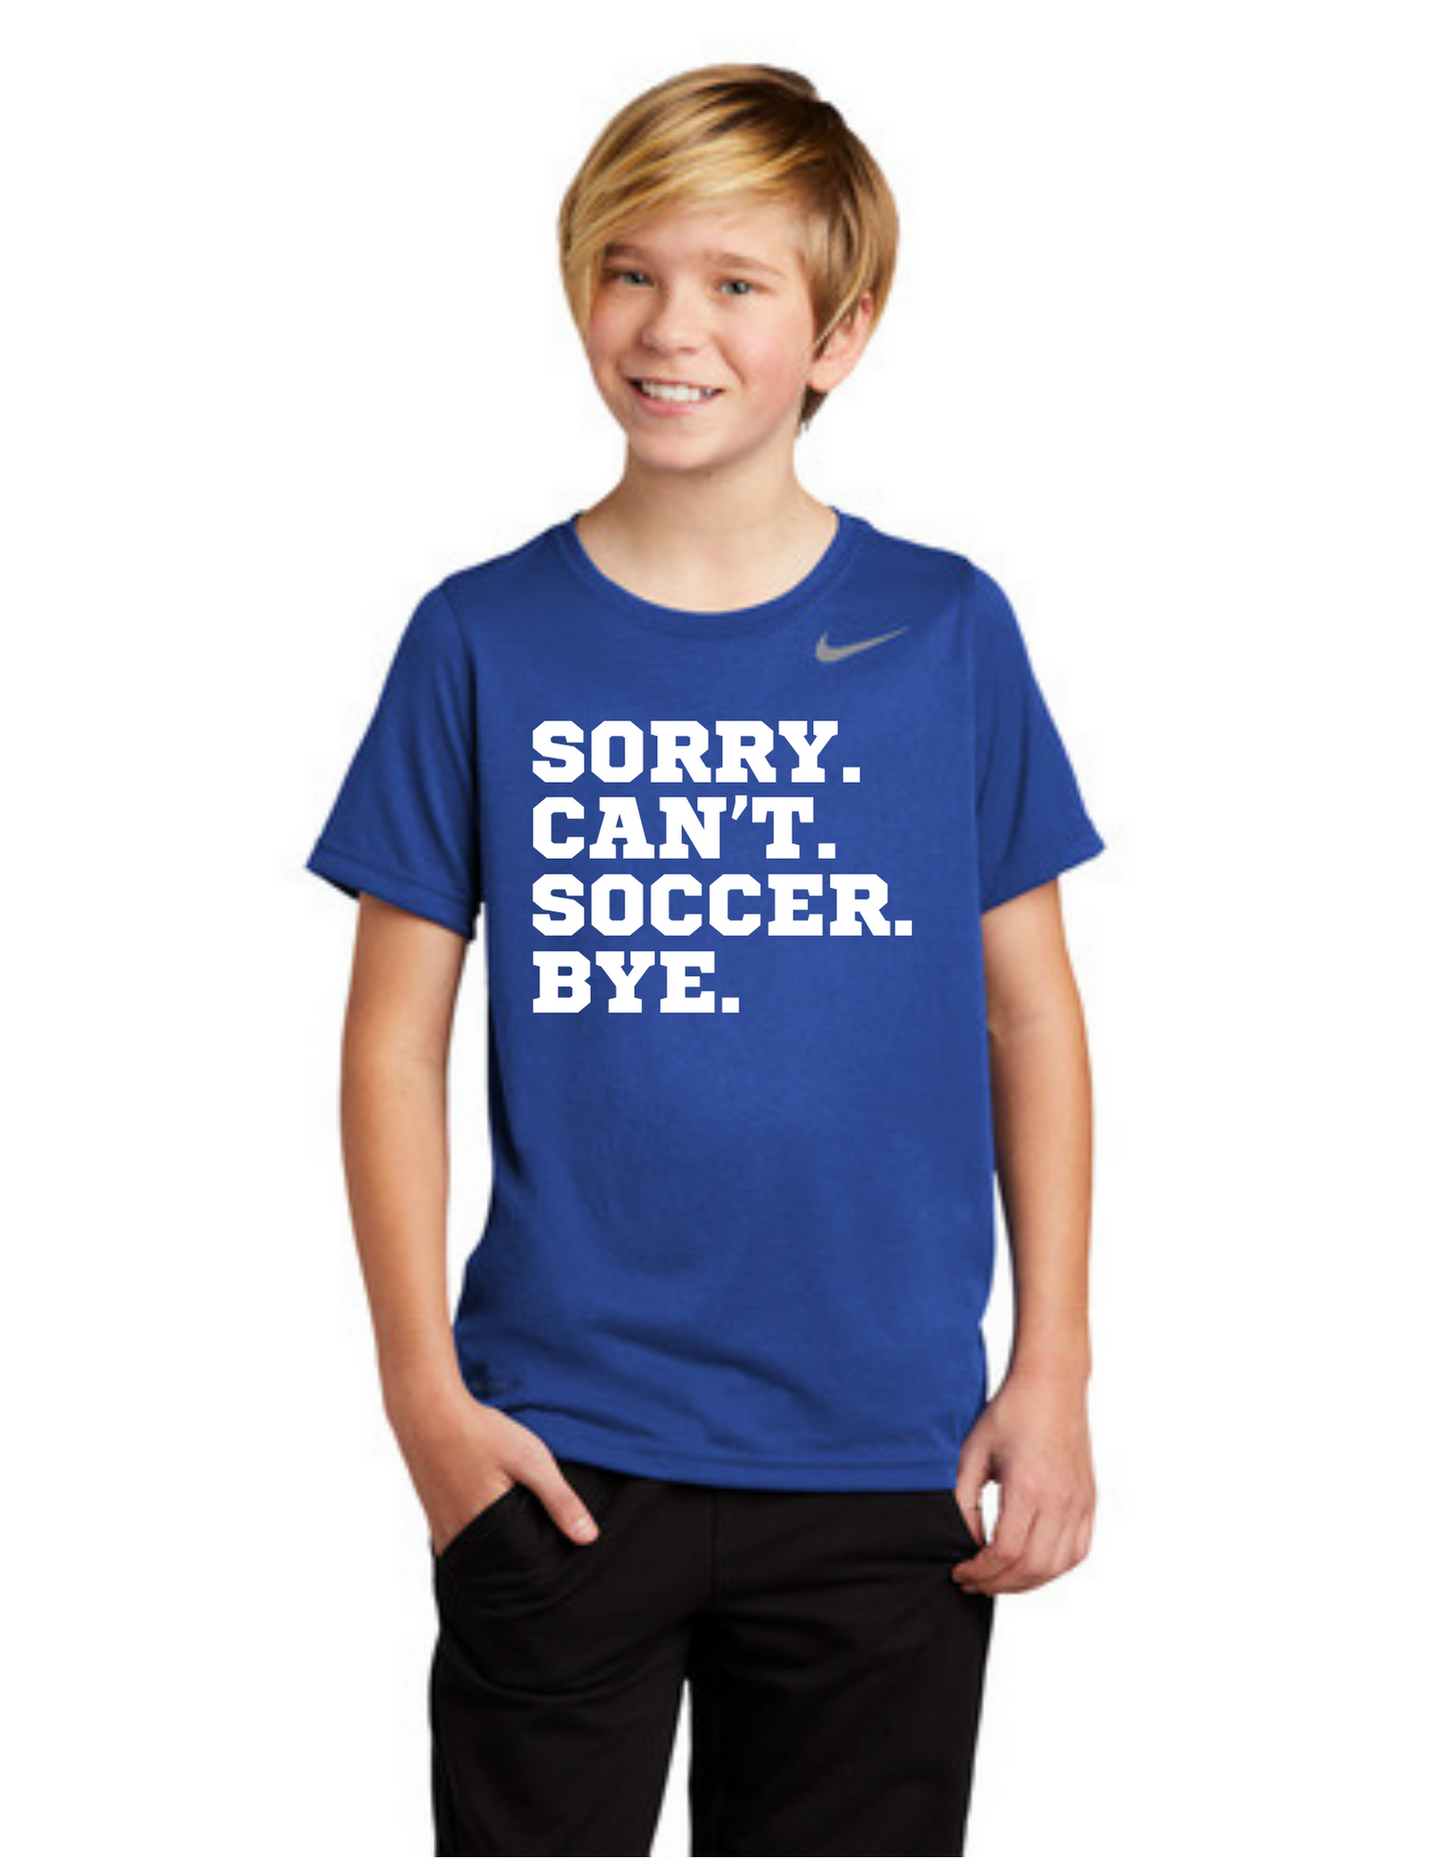 Nike Premier Youth Shirt - Sorry. Can't. Soccer. Bye.